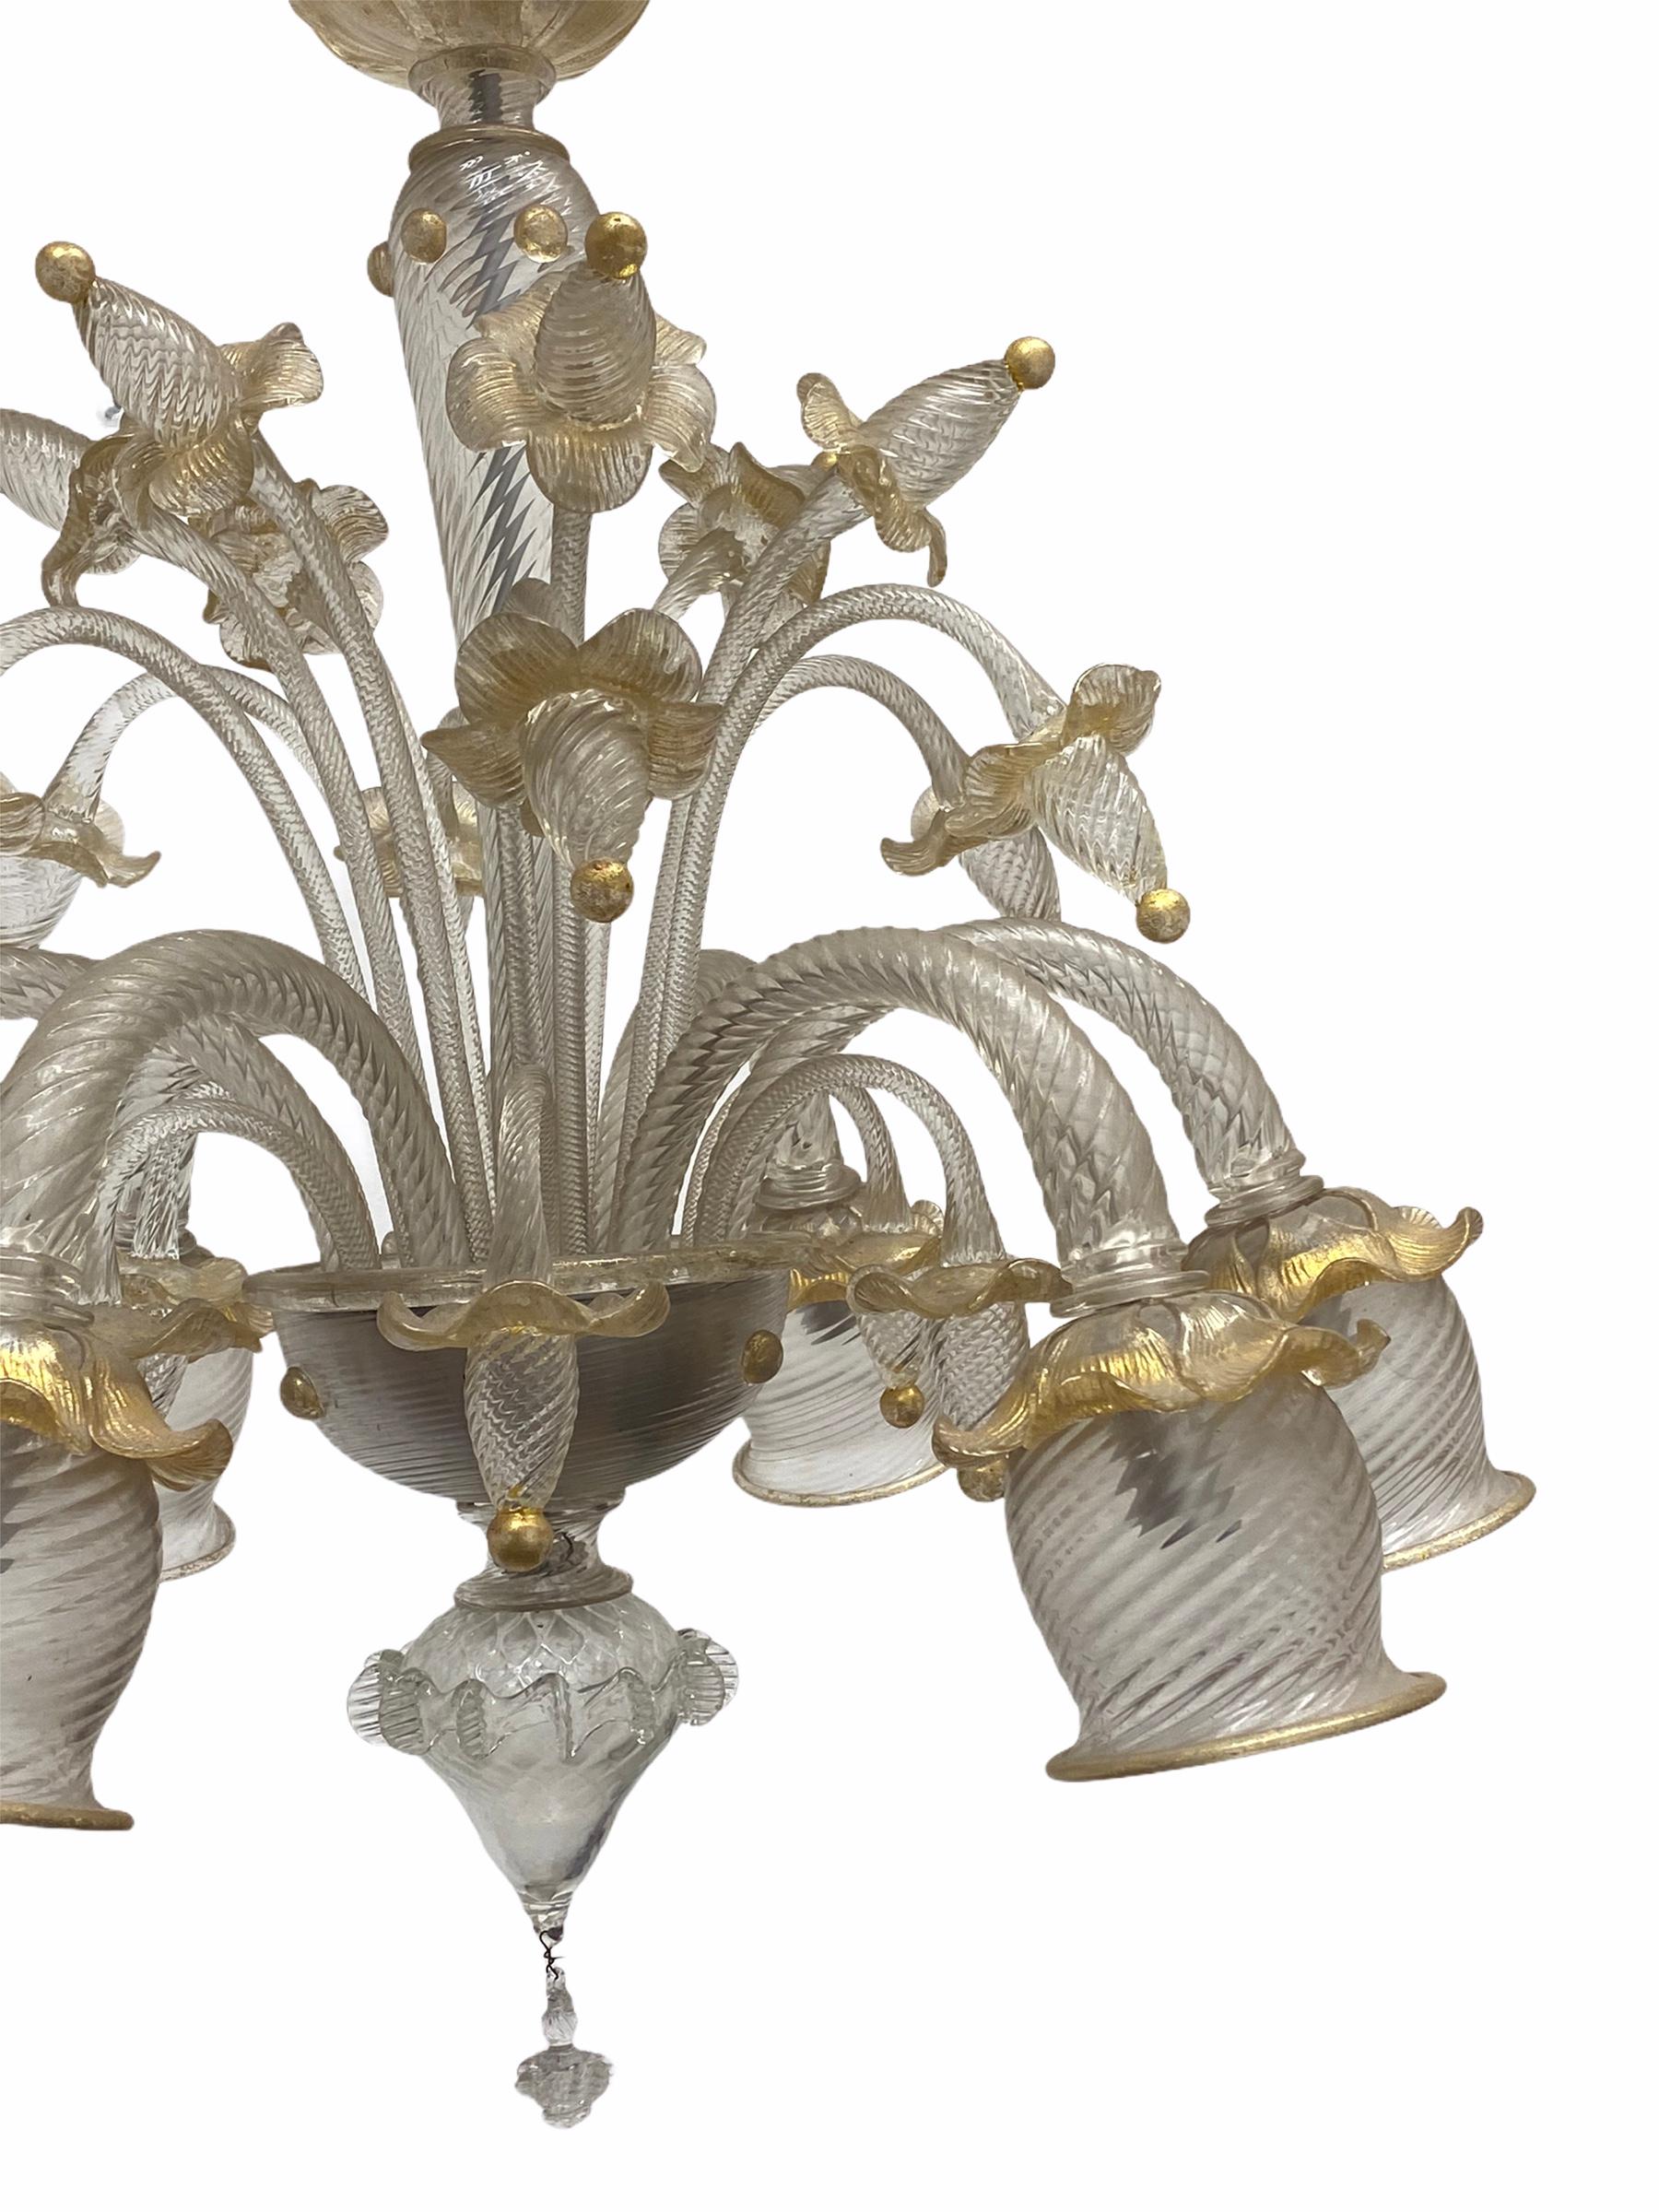 Hand-Crafted Stunning Gold Dusted Murano Chandelier, by Barovier Toso Murano, Italy, 1960s For Sale